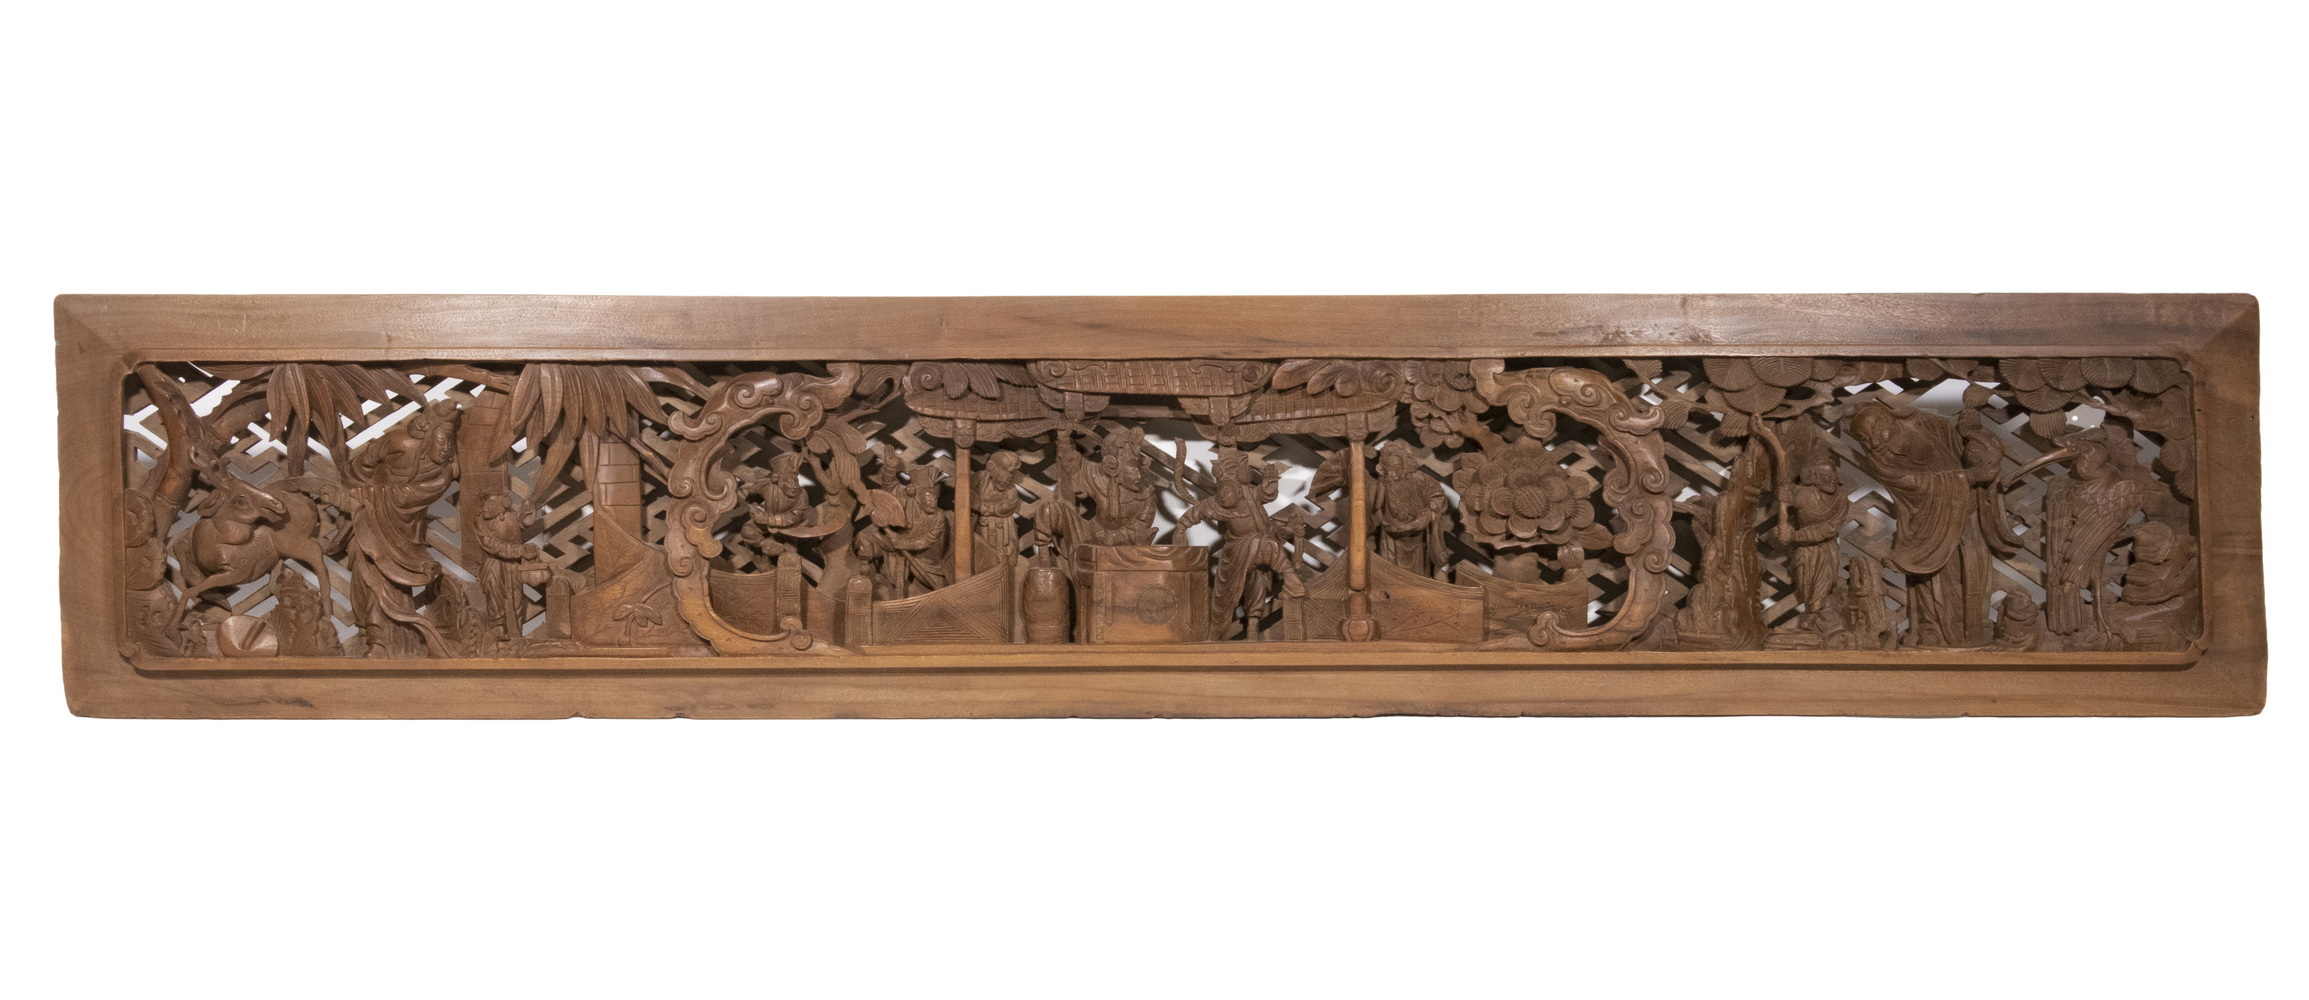 LARGE 19TH C. CHINESE CARVED ARCHITECTURAL